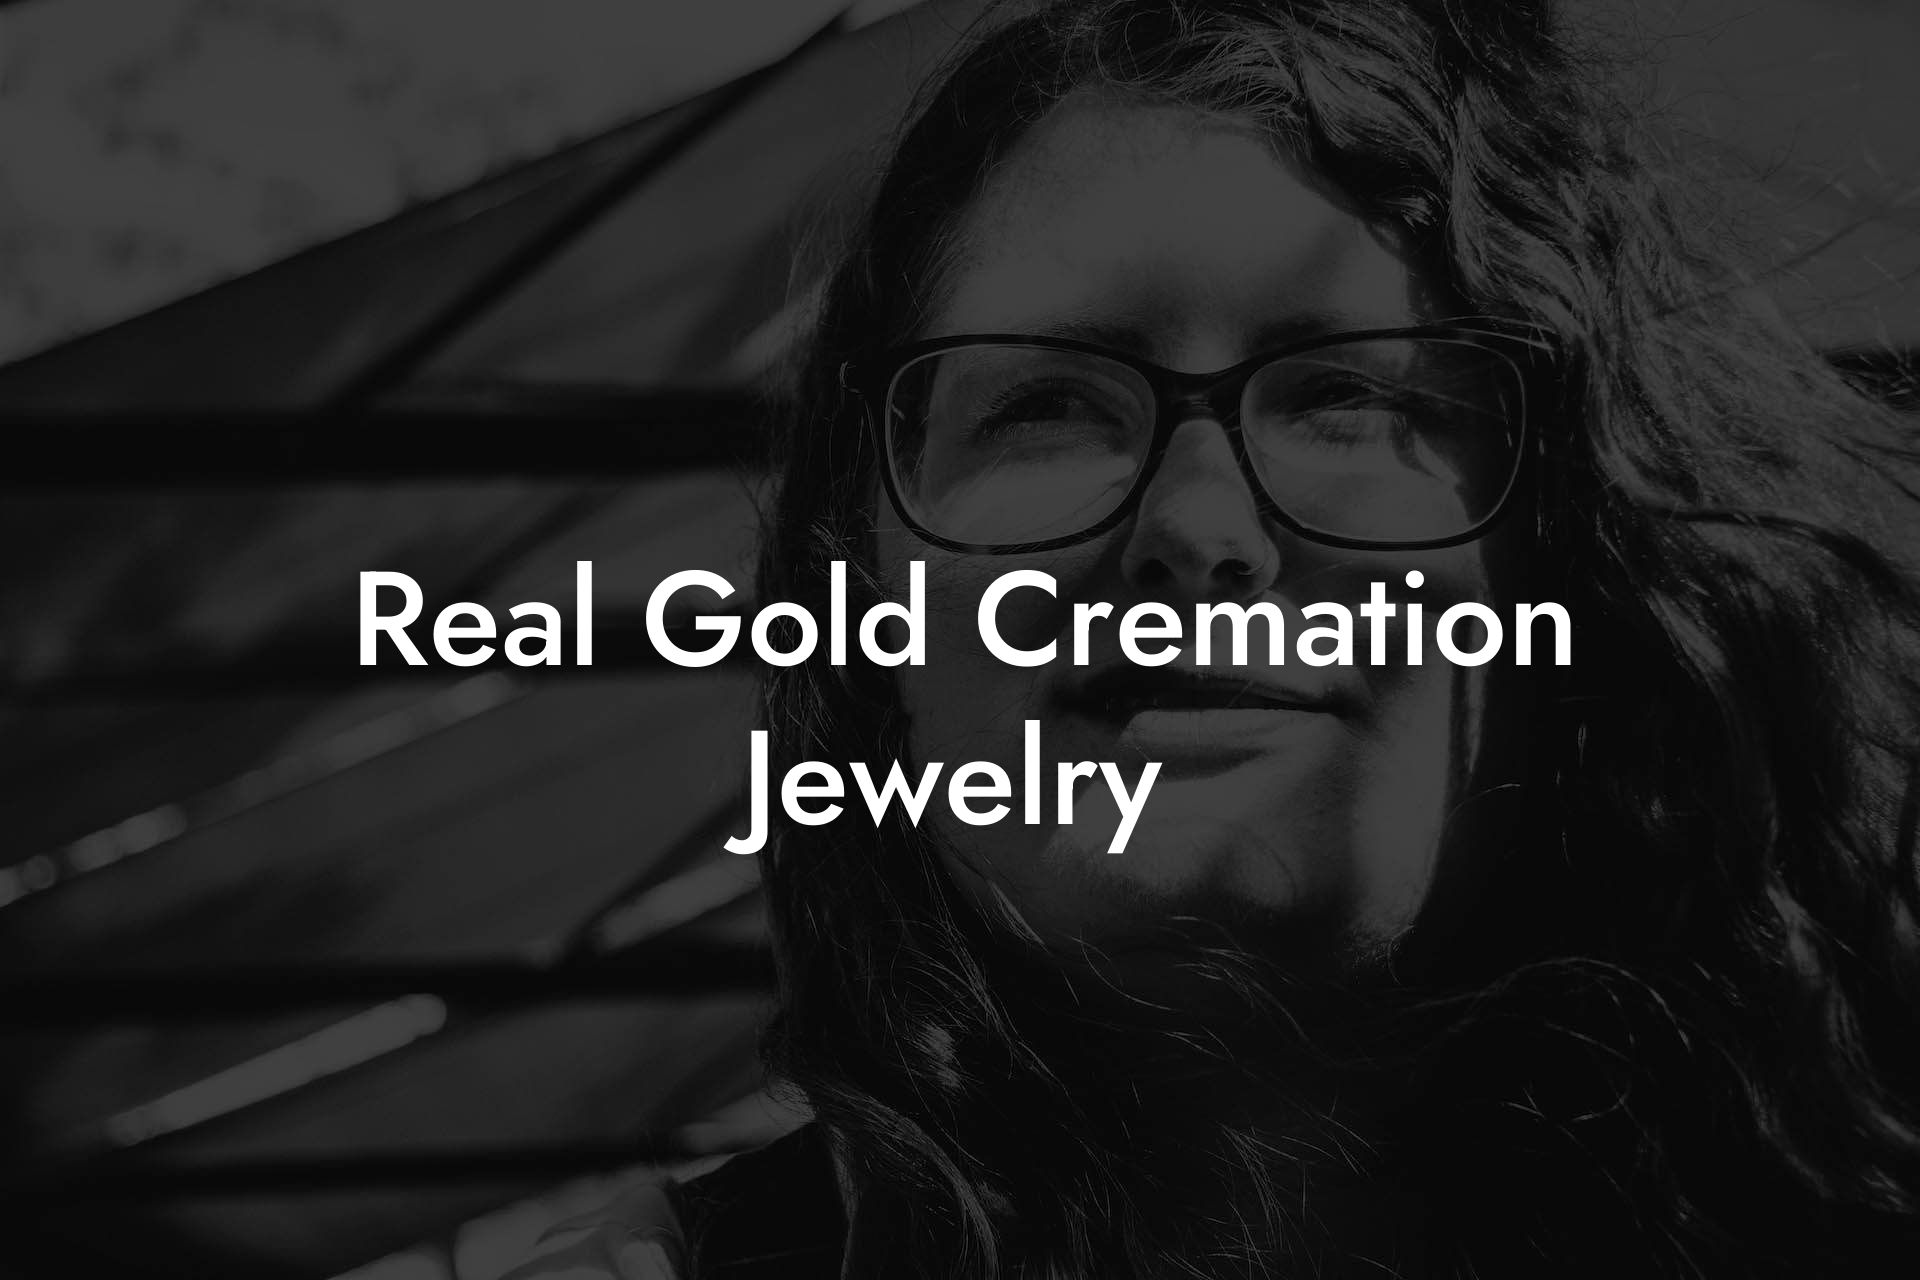 Real Gold Cremation Jewelry